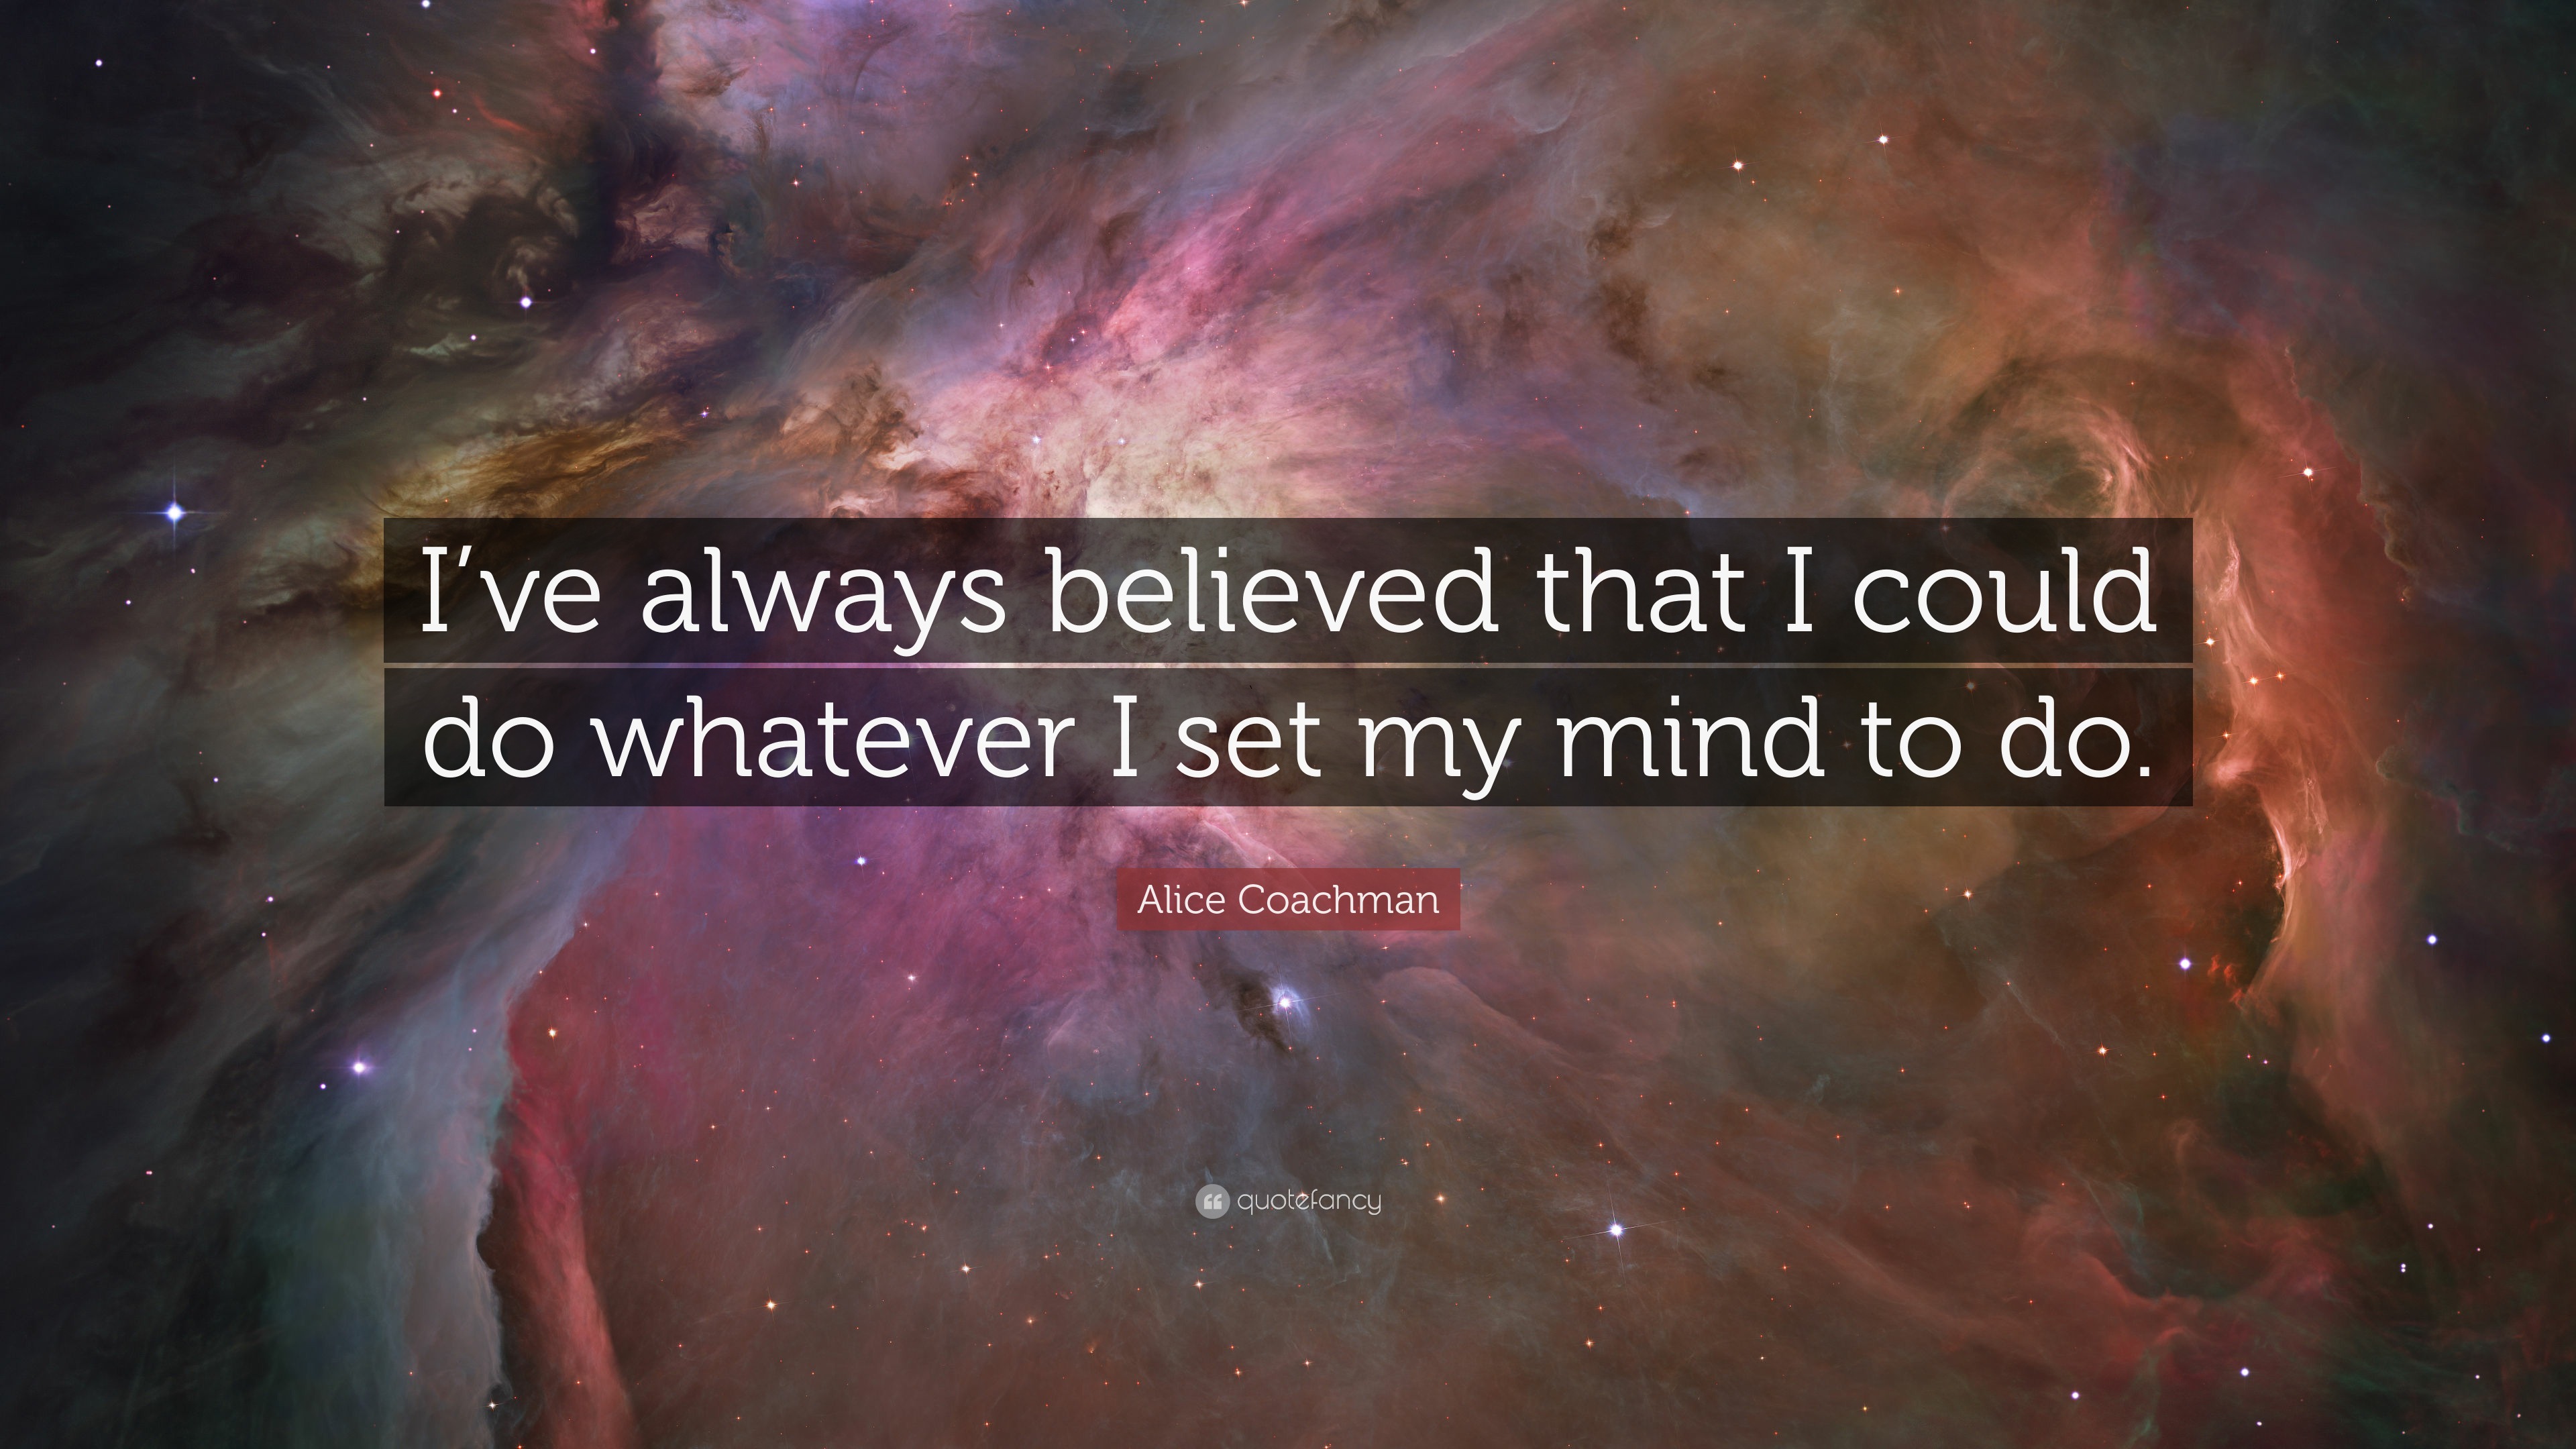 Alice Coachman Quote: “I’ve always believed that I could do whatever I